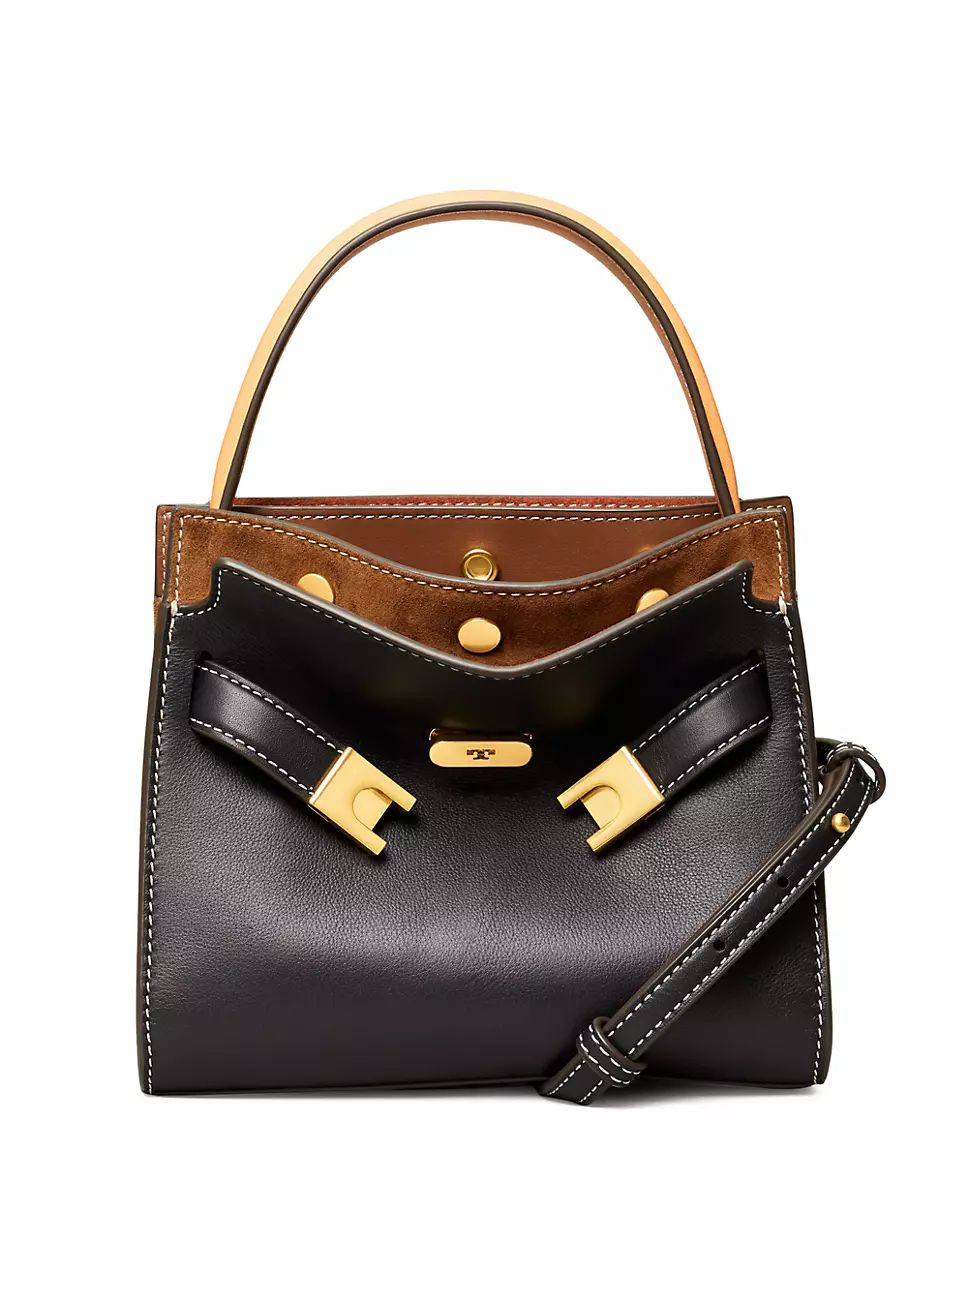 Lee Radziwill Petite Leather Double Bag | Saks Fifth Avenue